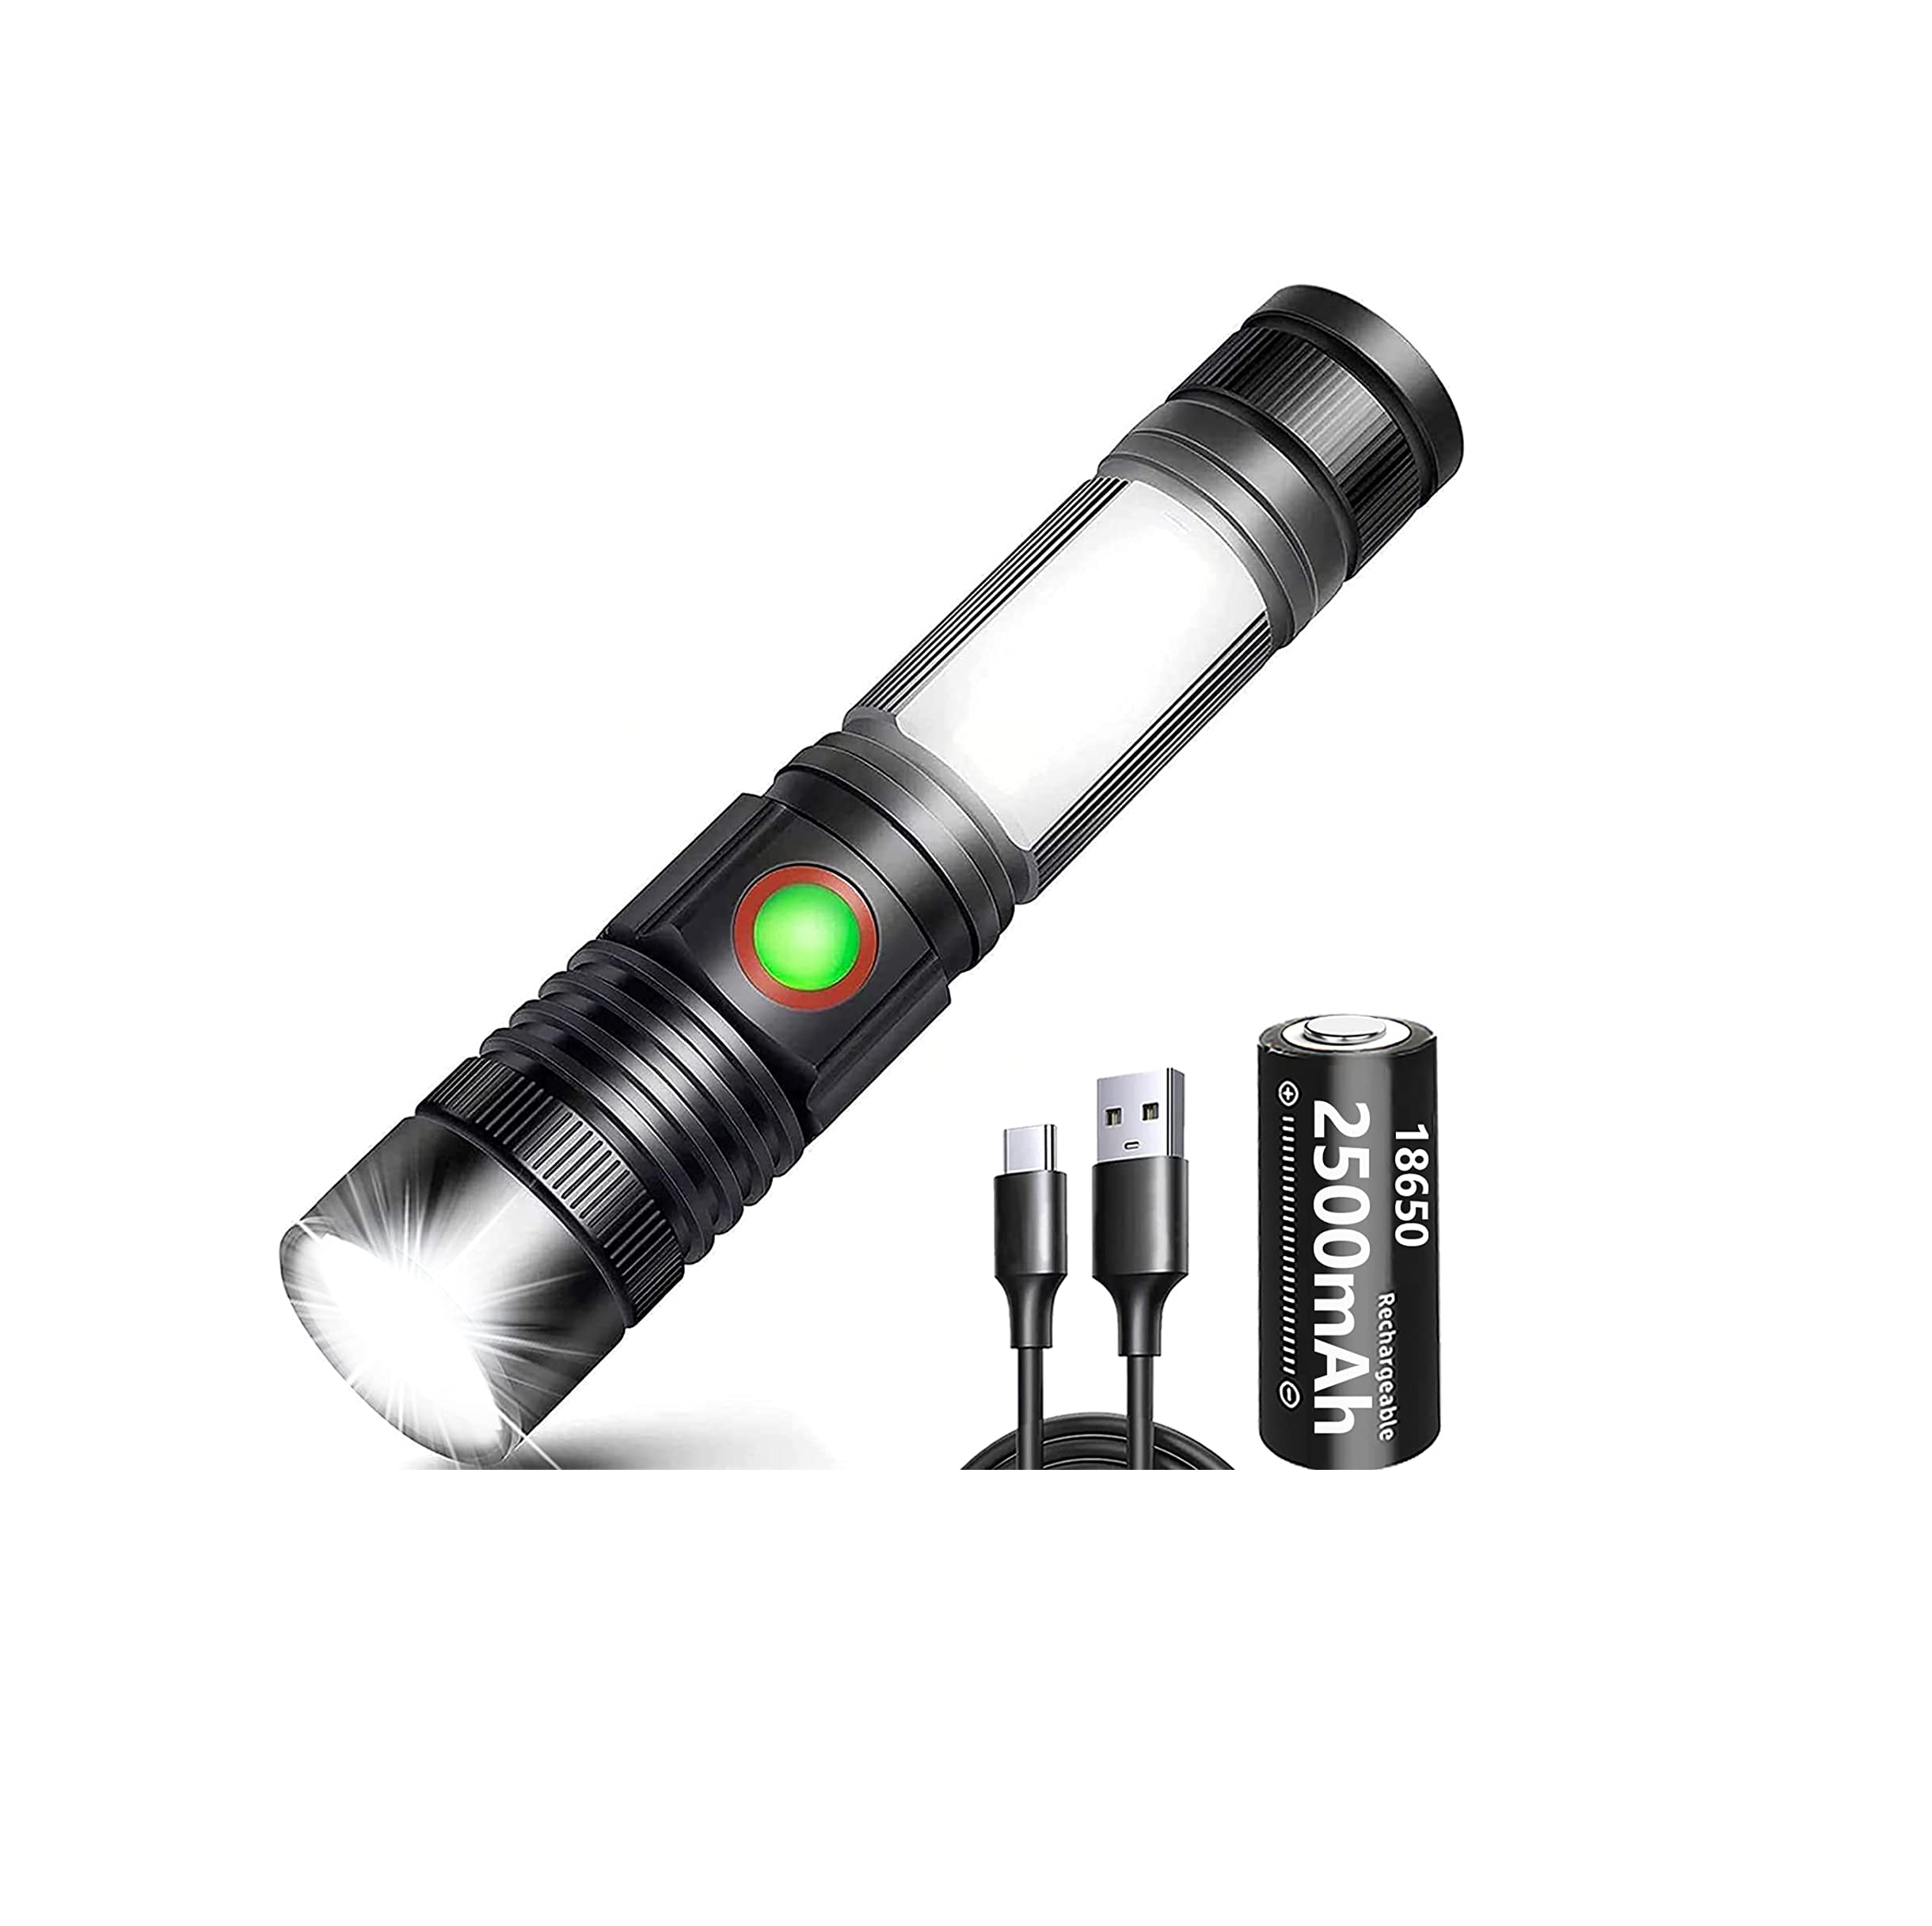 PowerBeam 2500: Rechargeable Mini Magnet Torch with COB Work LightProduct Name: S2600 Tactical Flashlight
Specifications:


[HIGH BRIGHTNESS] The S2600 torch is equipped with XML-T6, providing an extremely high brightness of 2000 L